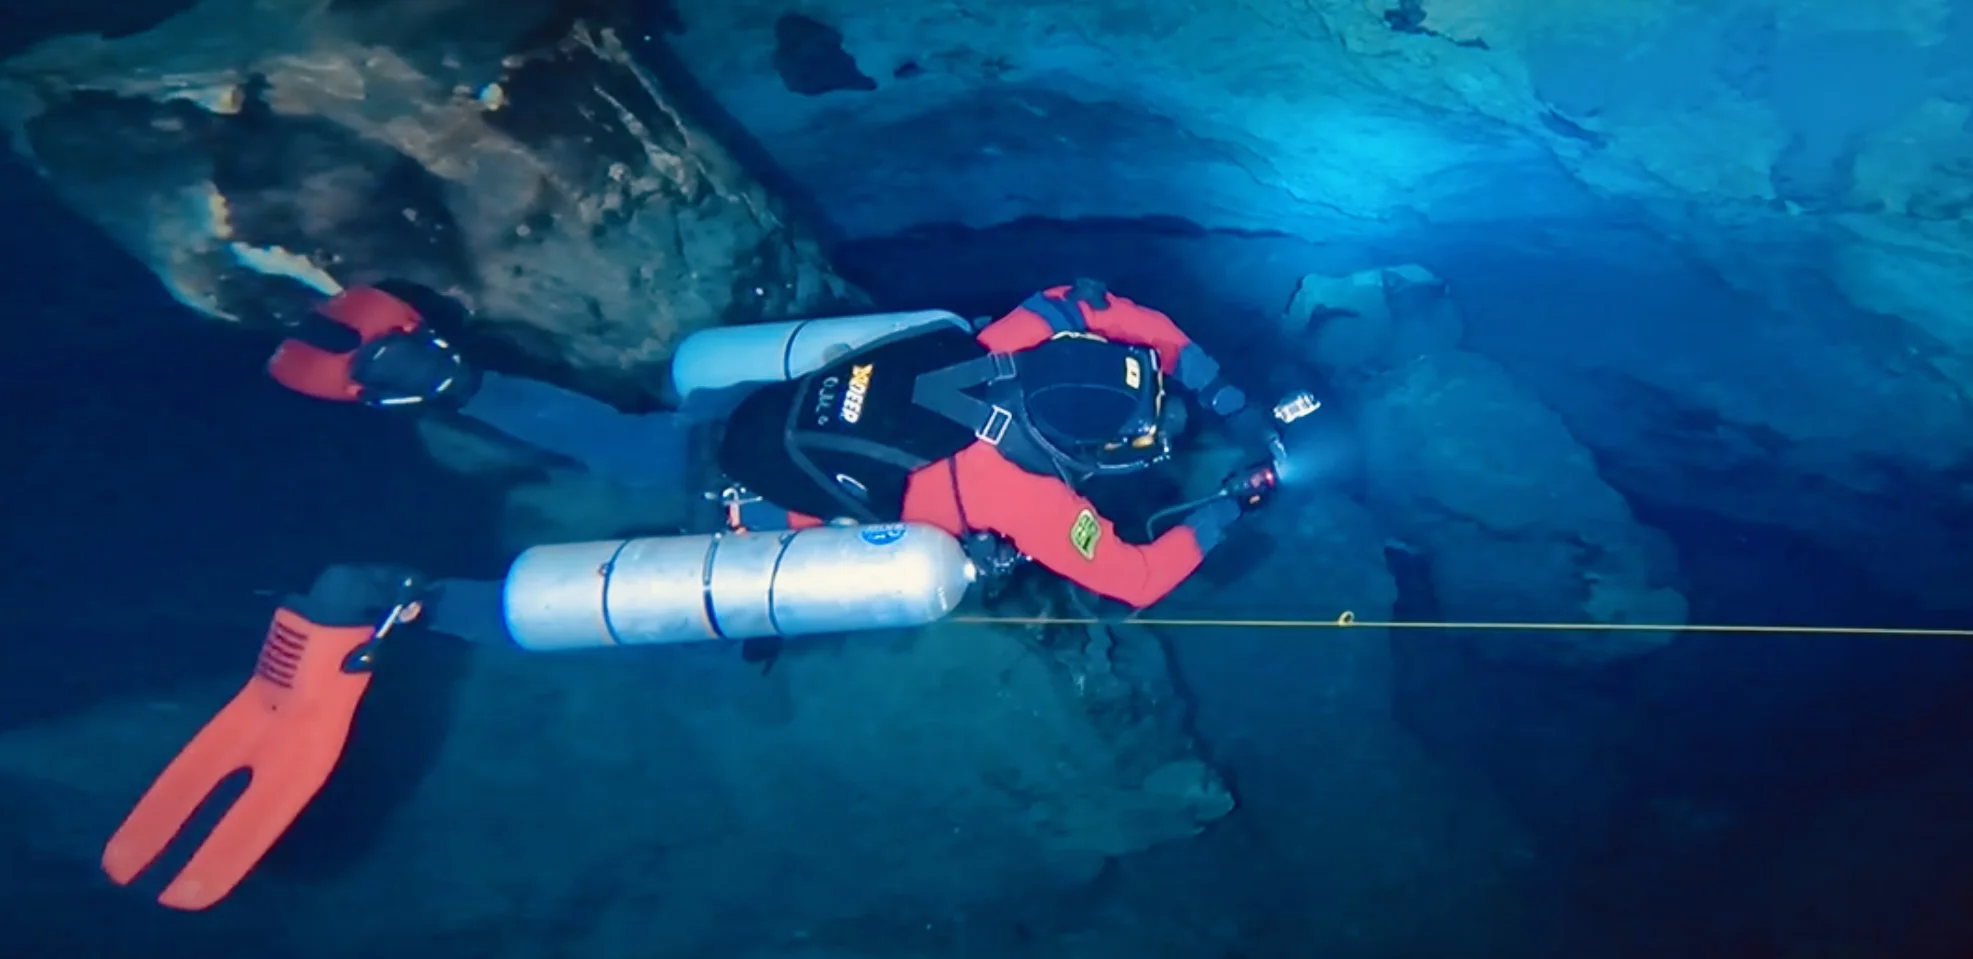 Sidemount cave diving in the Dominican Republic.